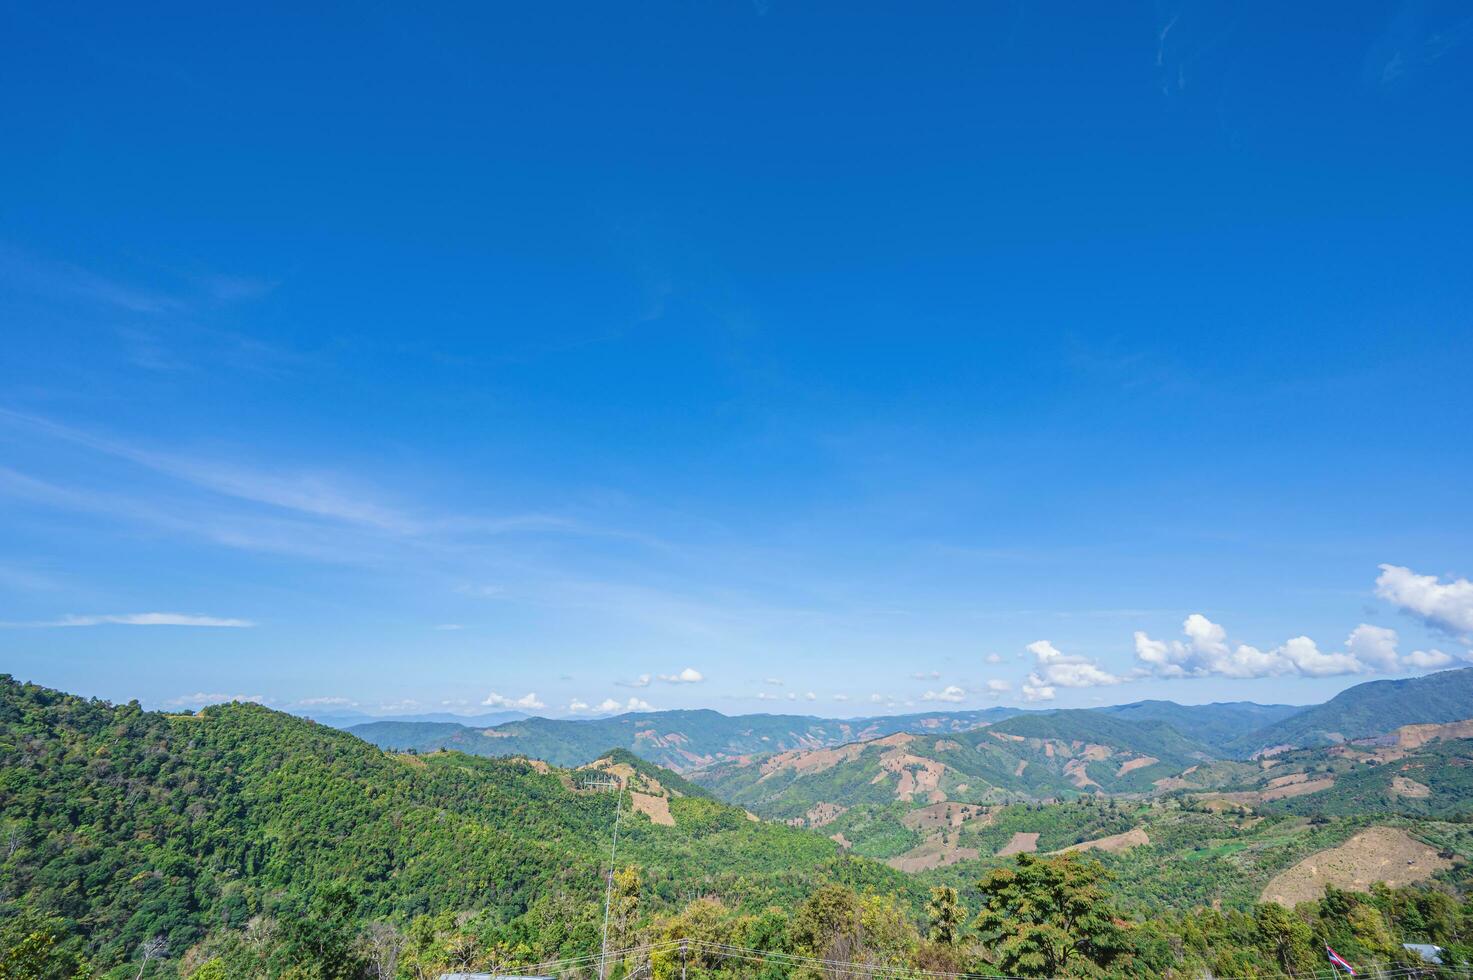 Beautiful mountain view and blue sky at nan province.Nan is a rural province in northern Thailand bordering Laos photo